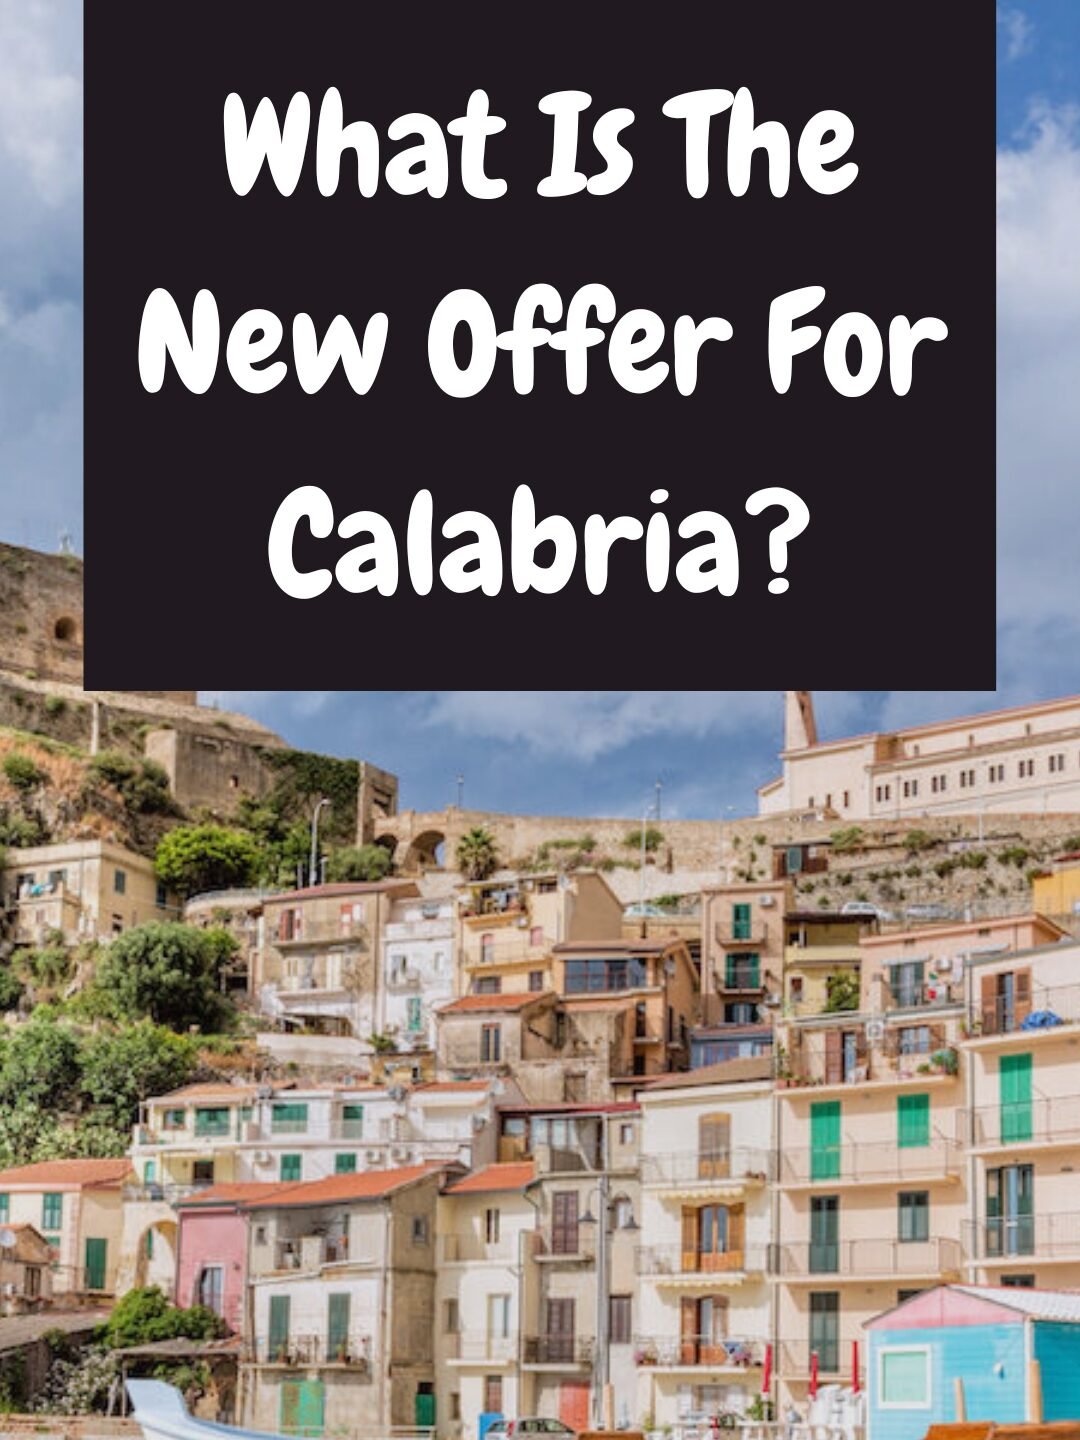 What Is The New Offer For Calabria